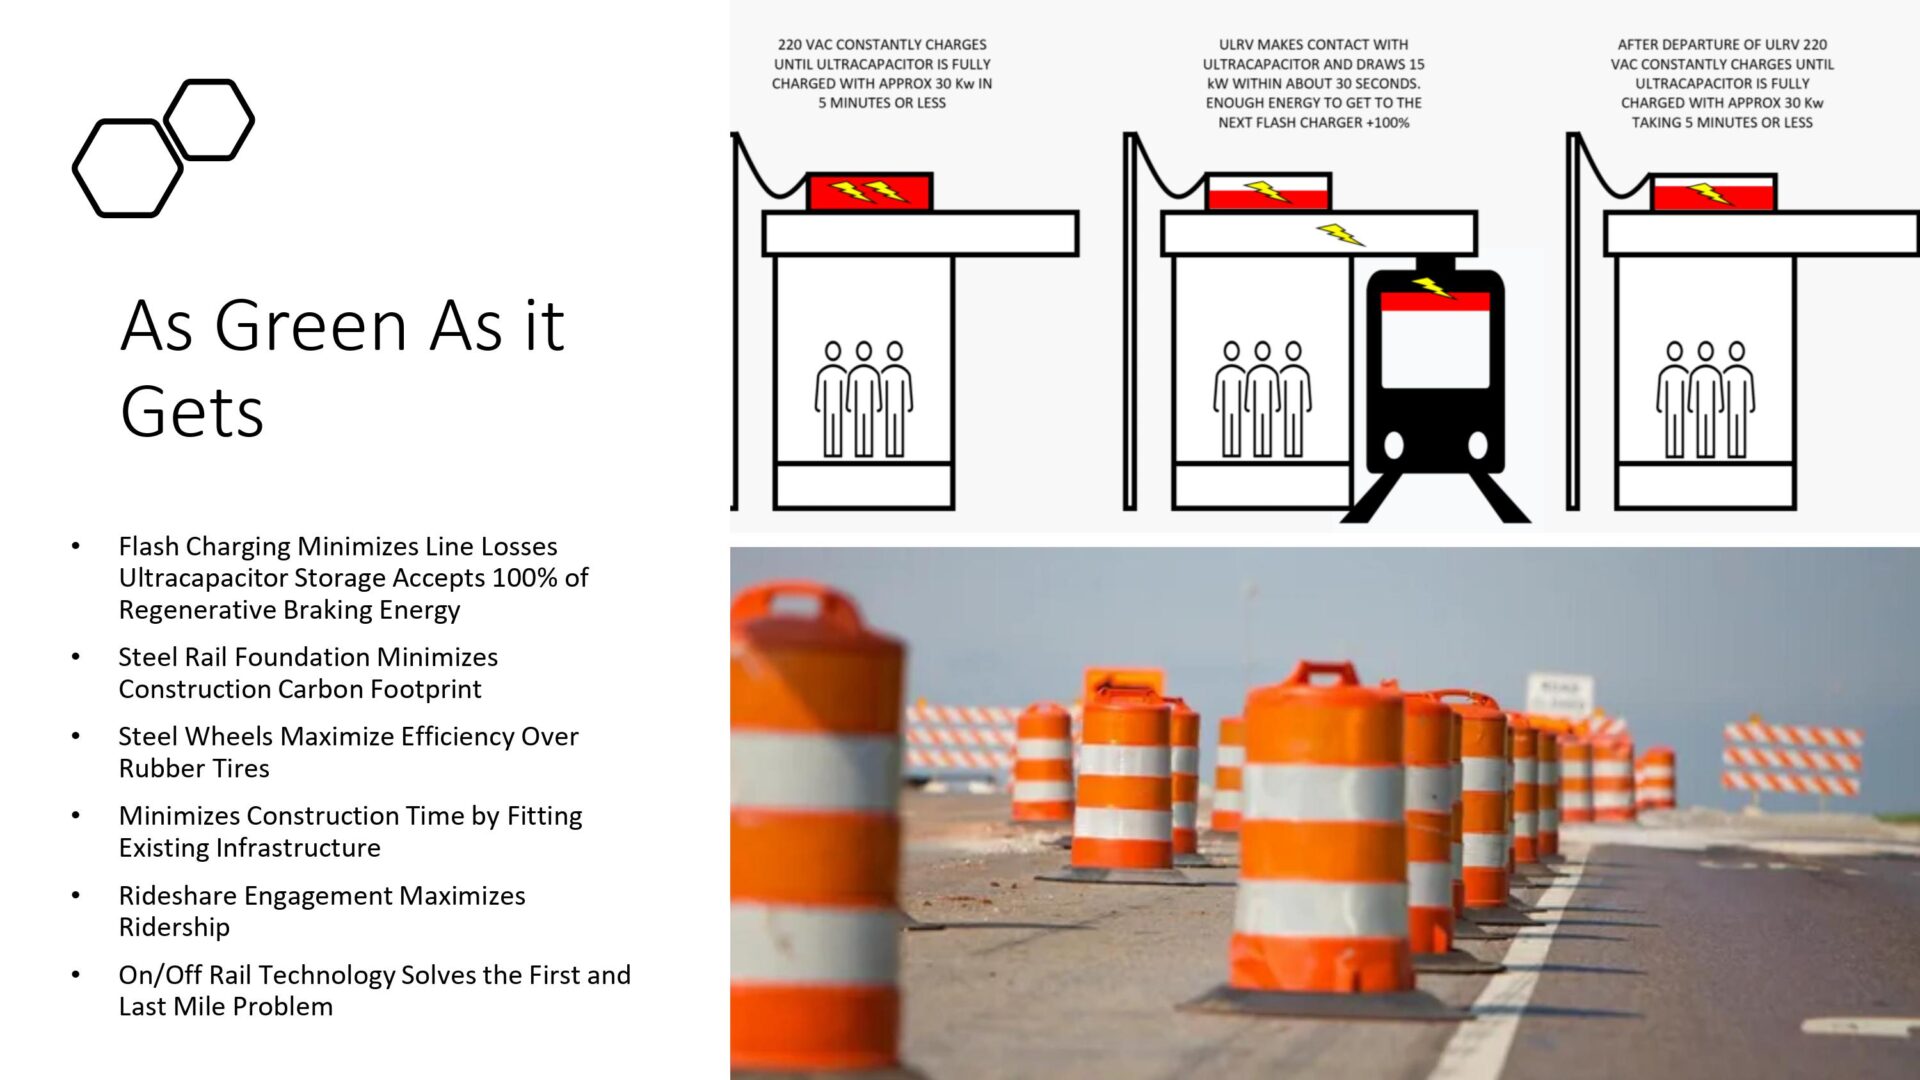 A picture of construction cones and the instructions for using them.